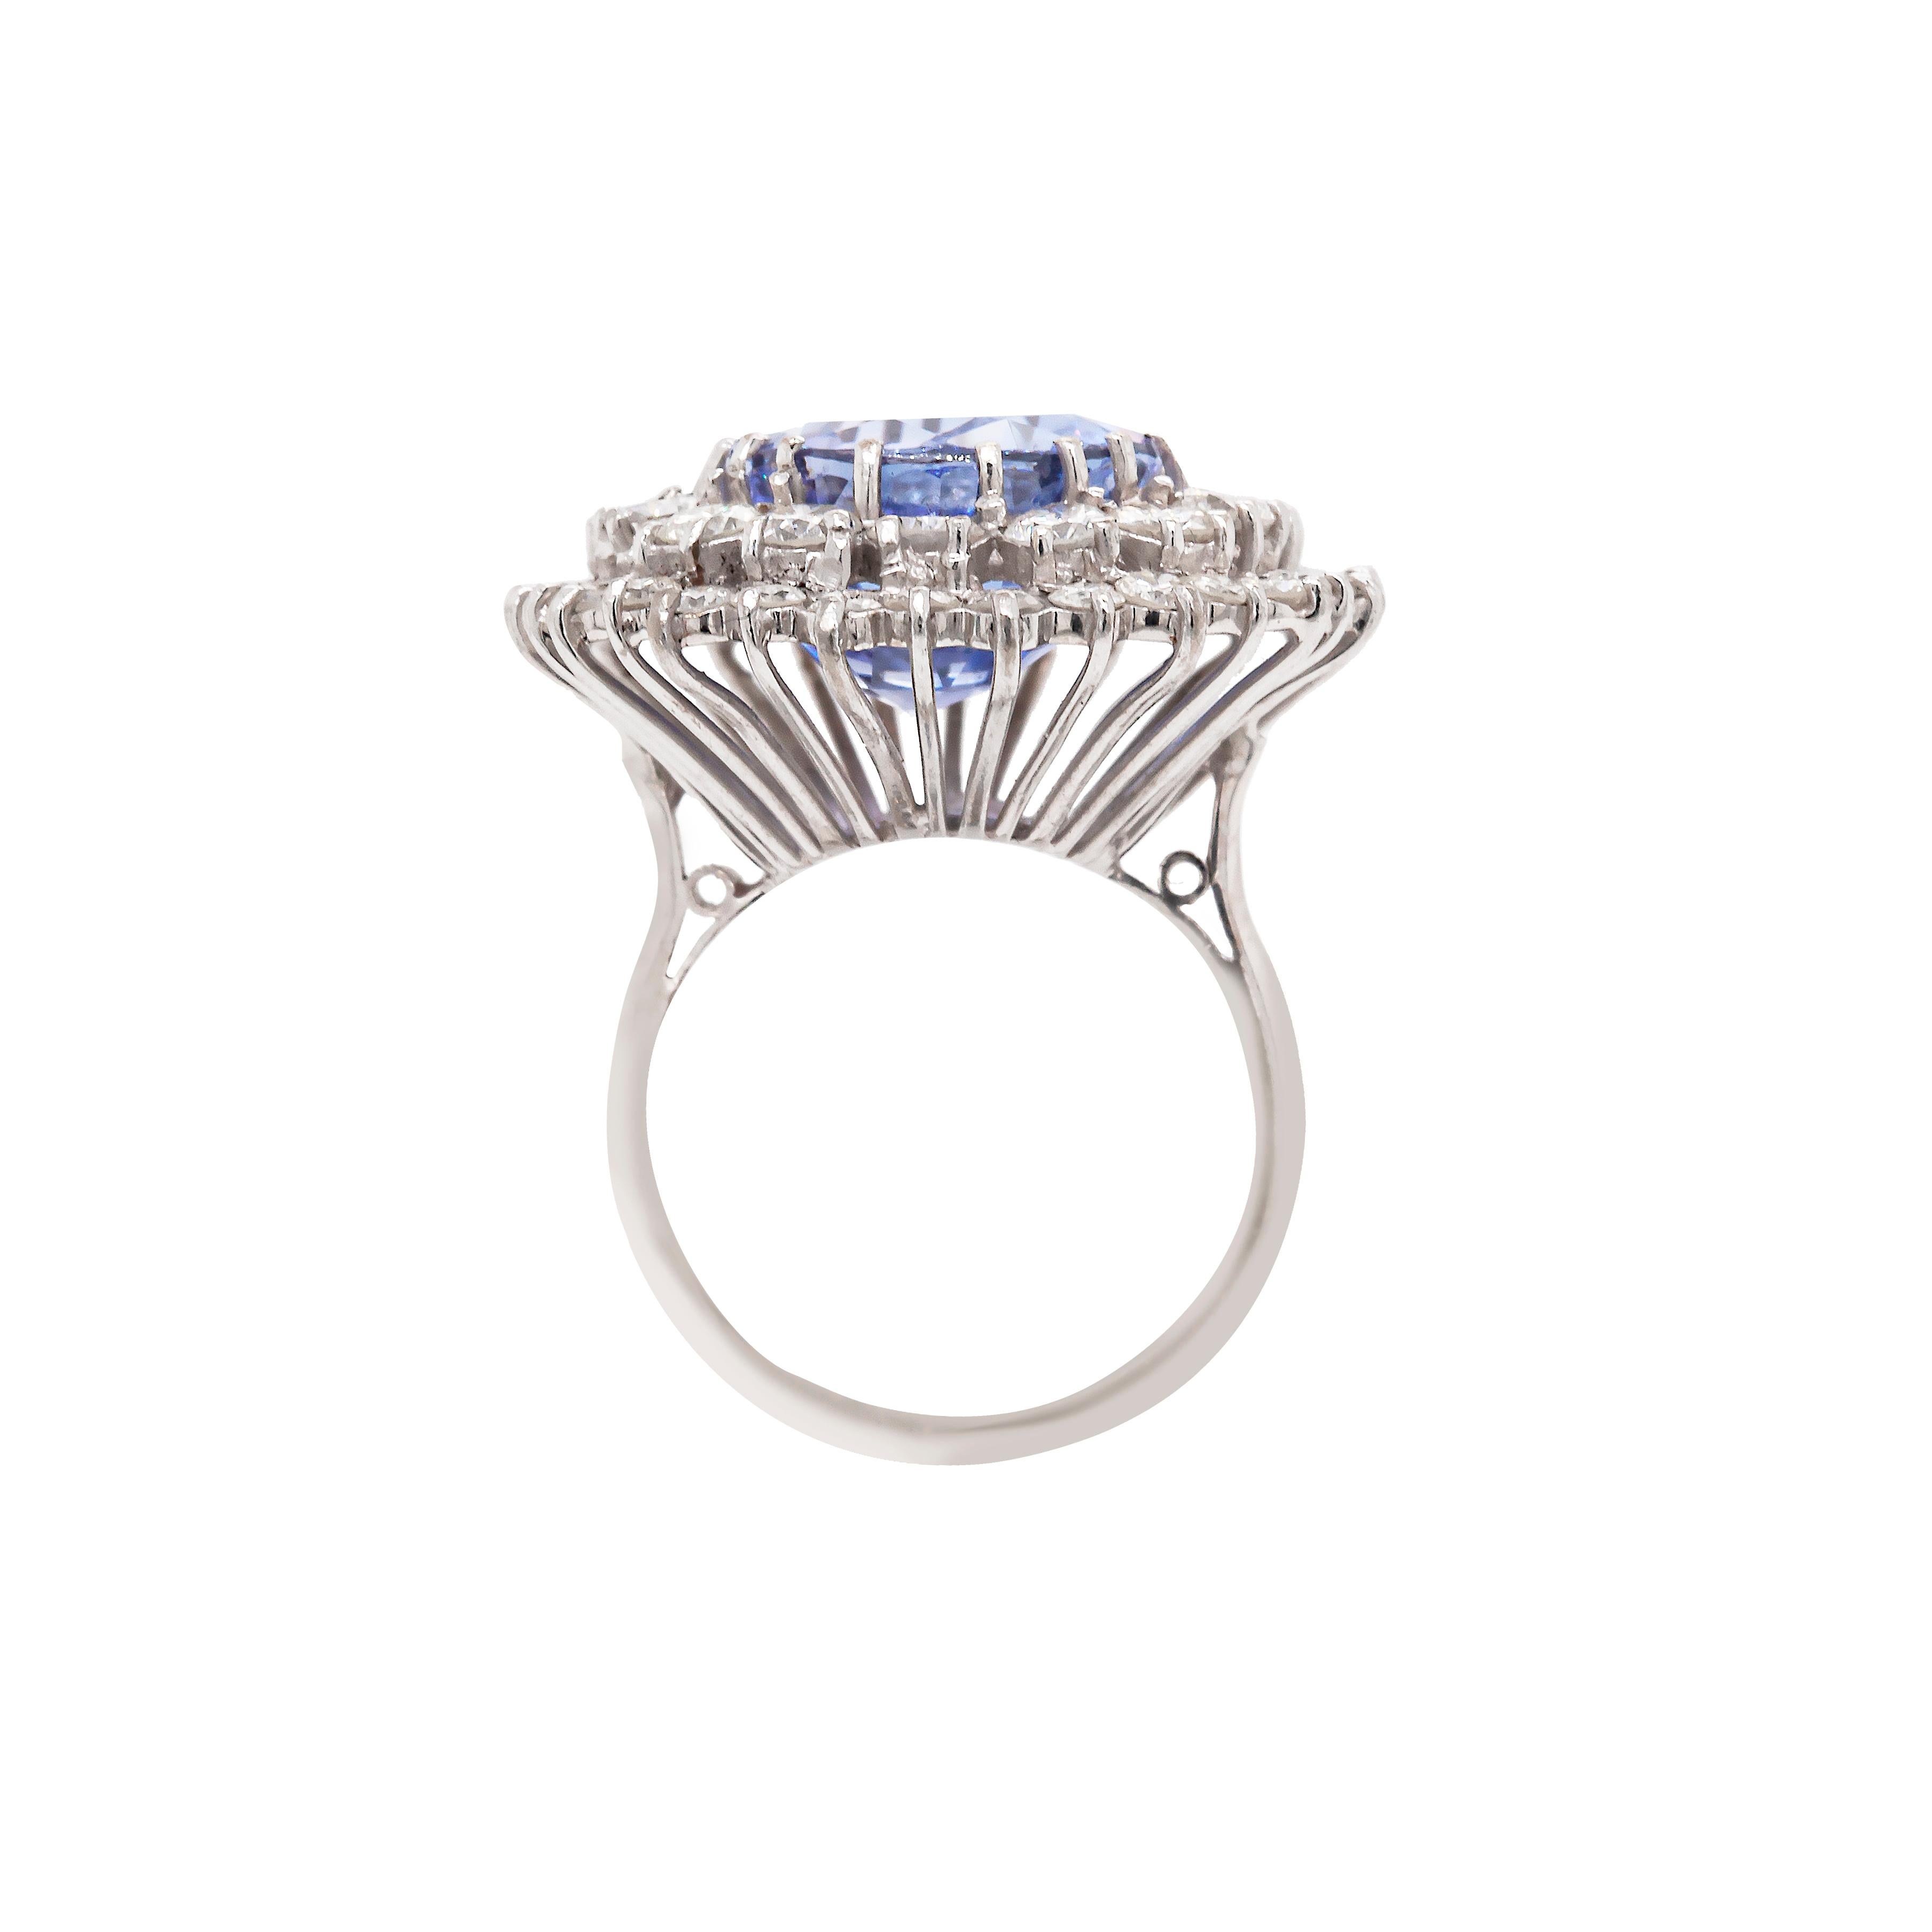 Finely crafted in 18 carat white gold, this cocktail cluster ring is a fantastic work of art sure to make a lasting impression.

At its heart, an absolutely captivating certified natural unheated transparent blue oval sapphire, weighing an